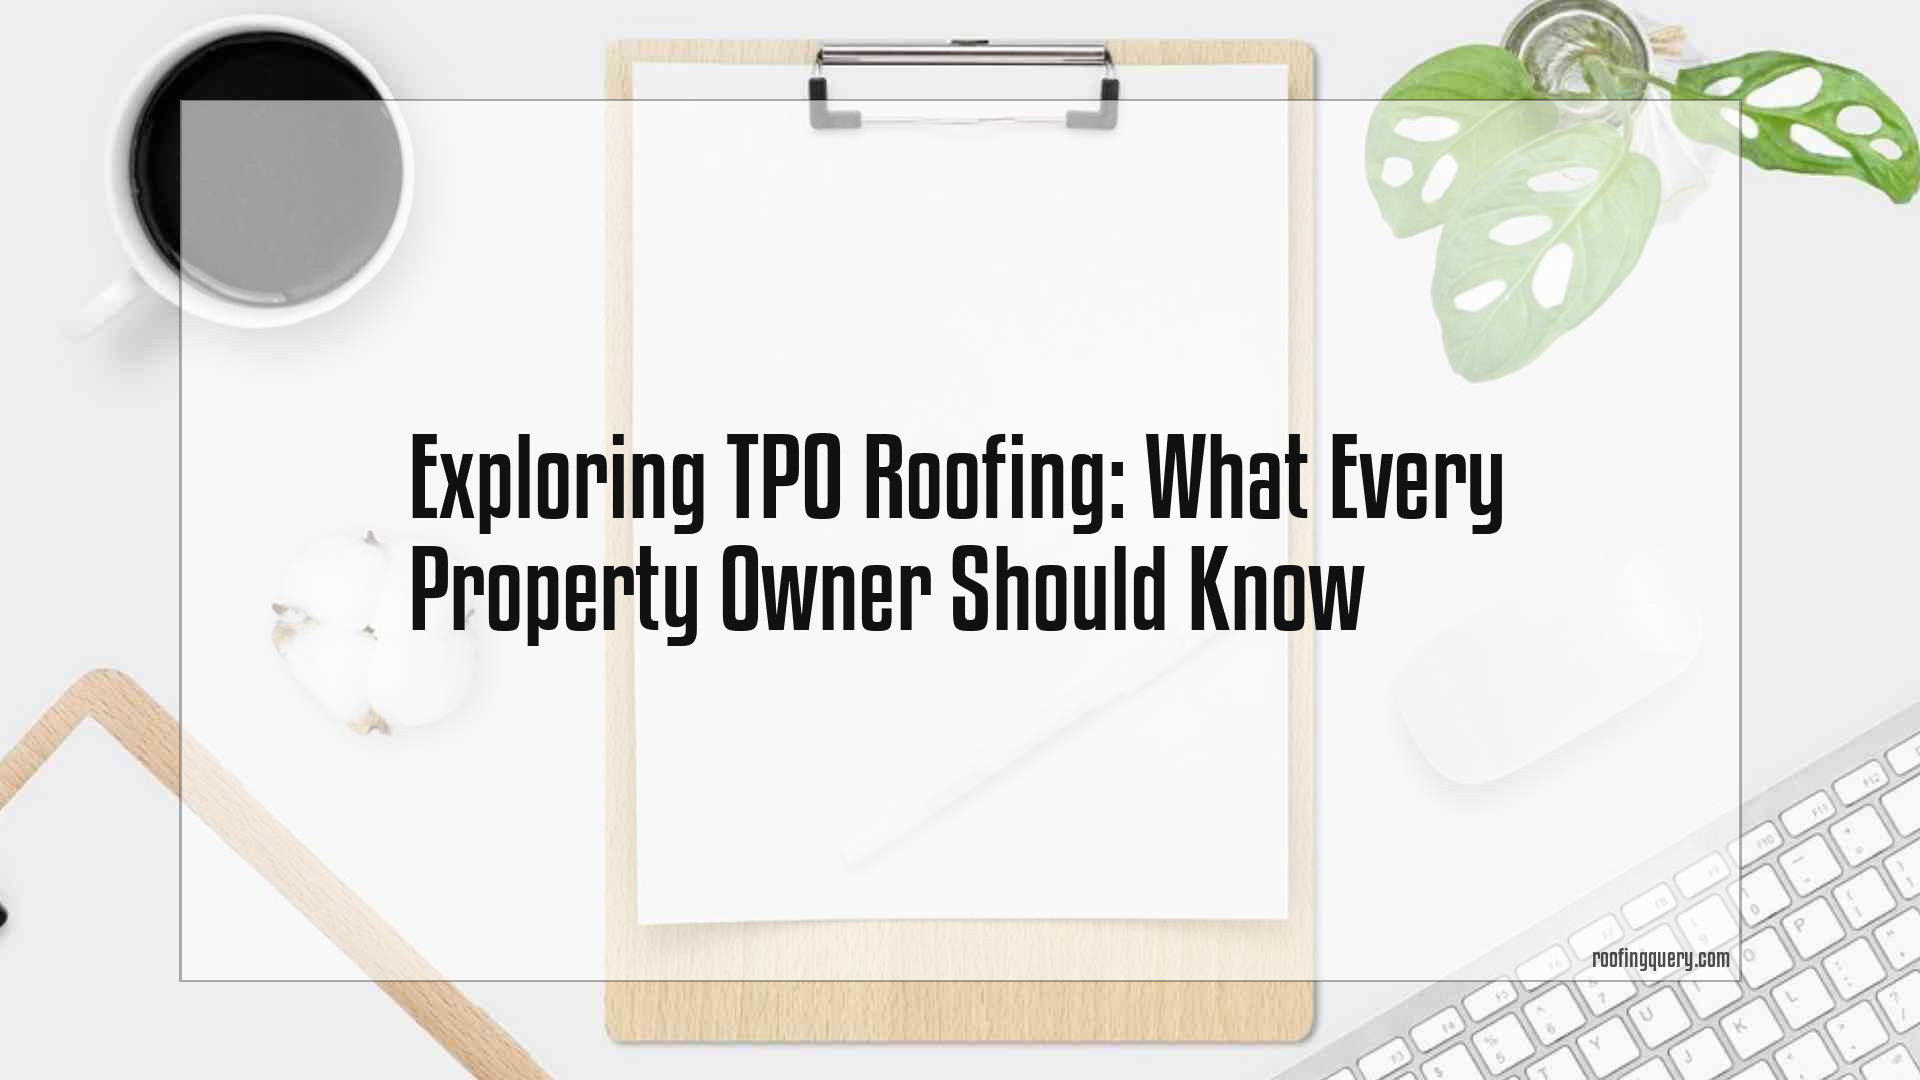 Exploring Tpo Roofing: What Every Property Owner Should Know